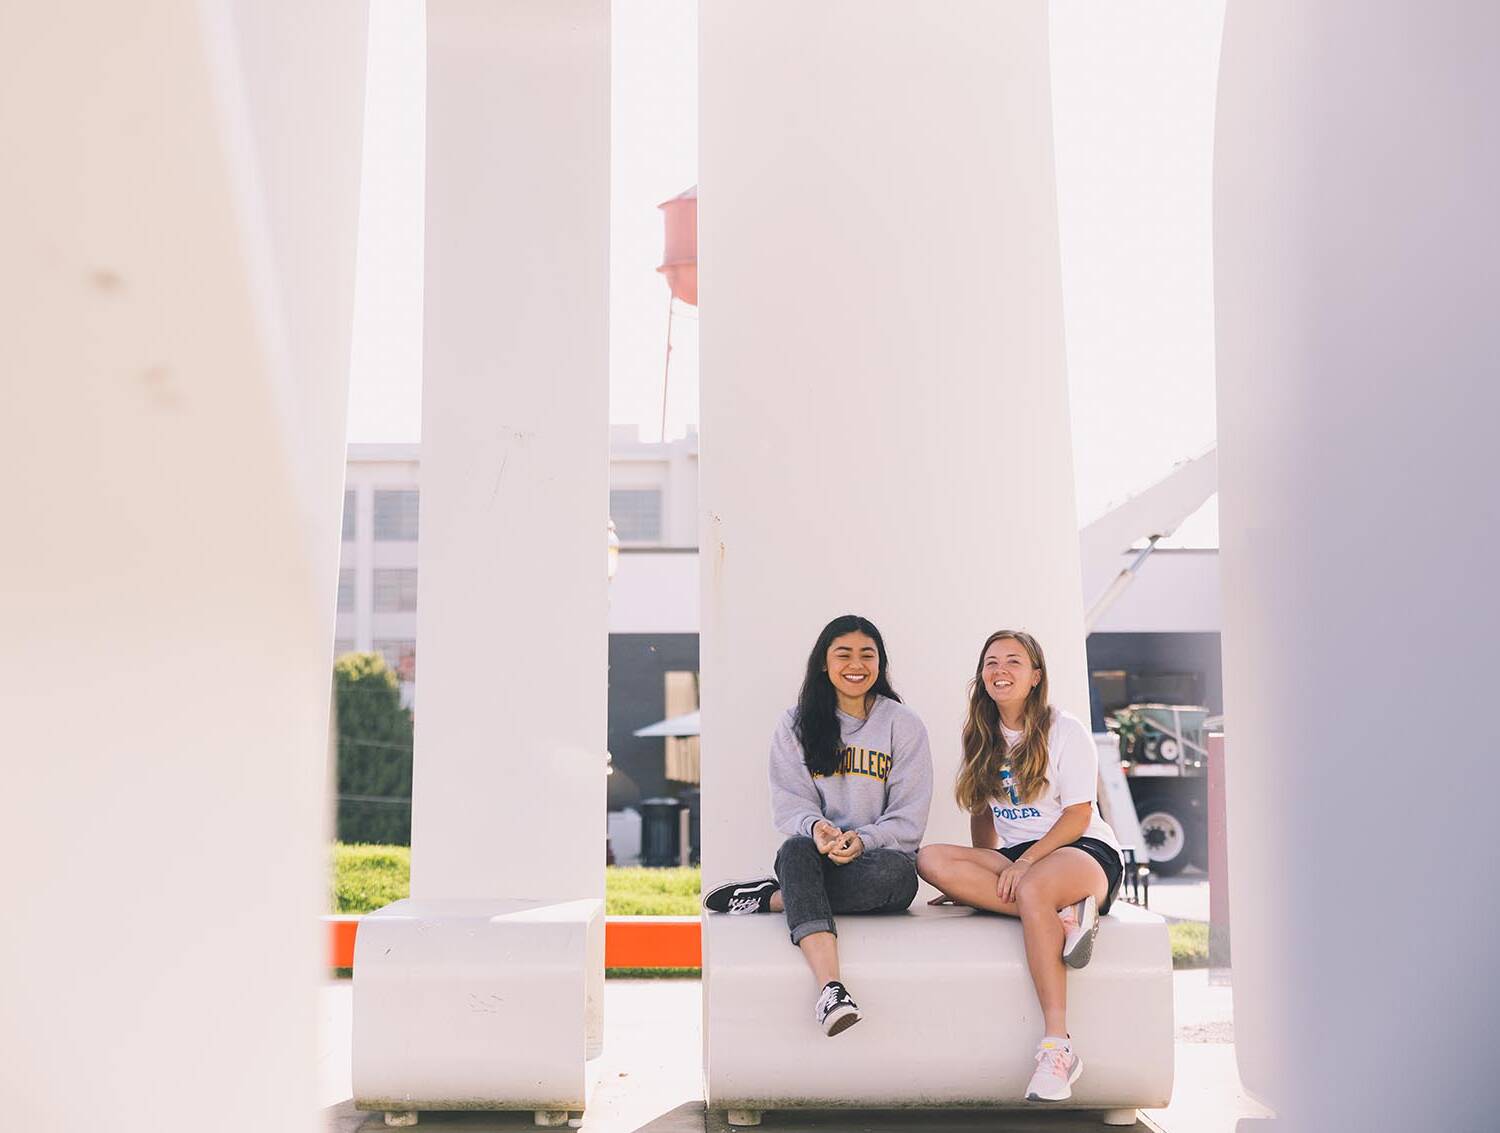 Students outside sitting on bench